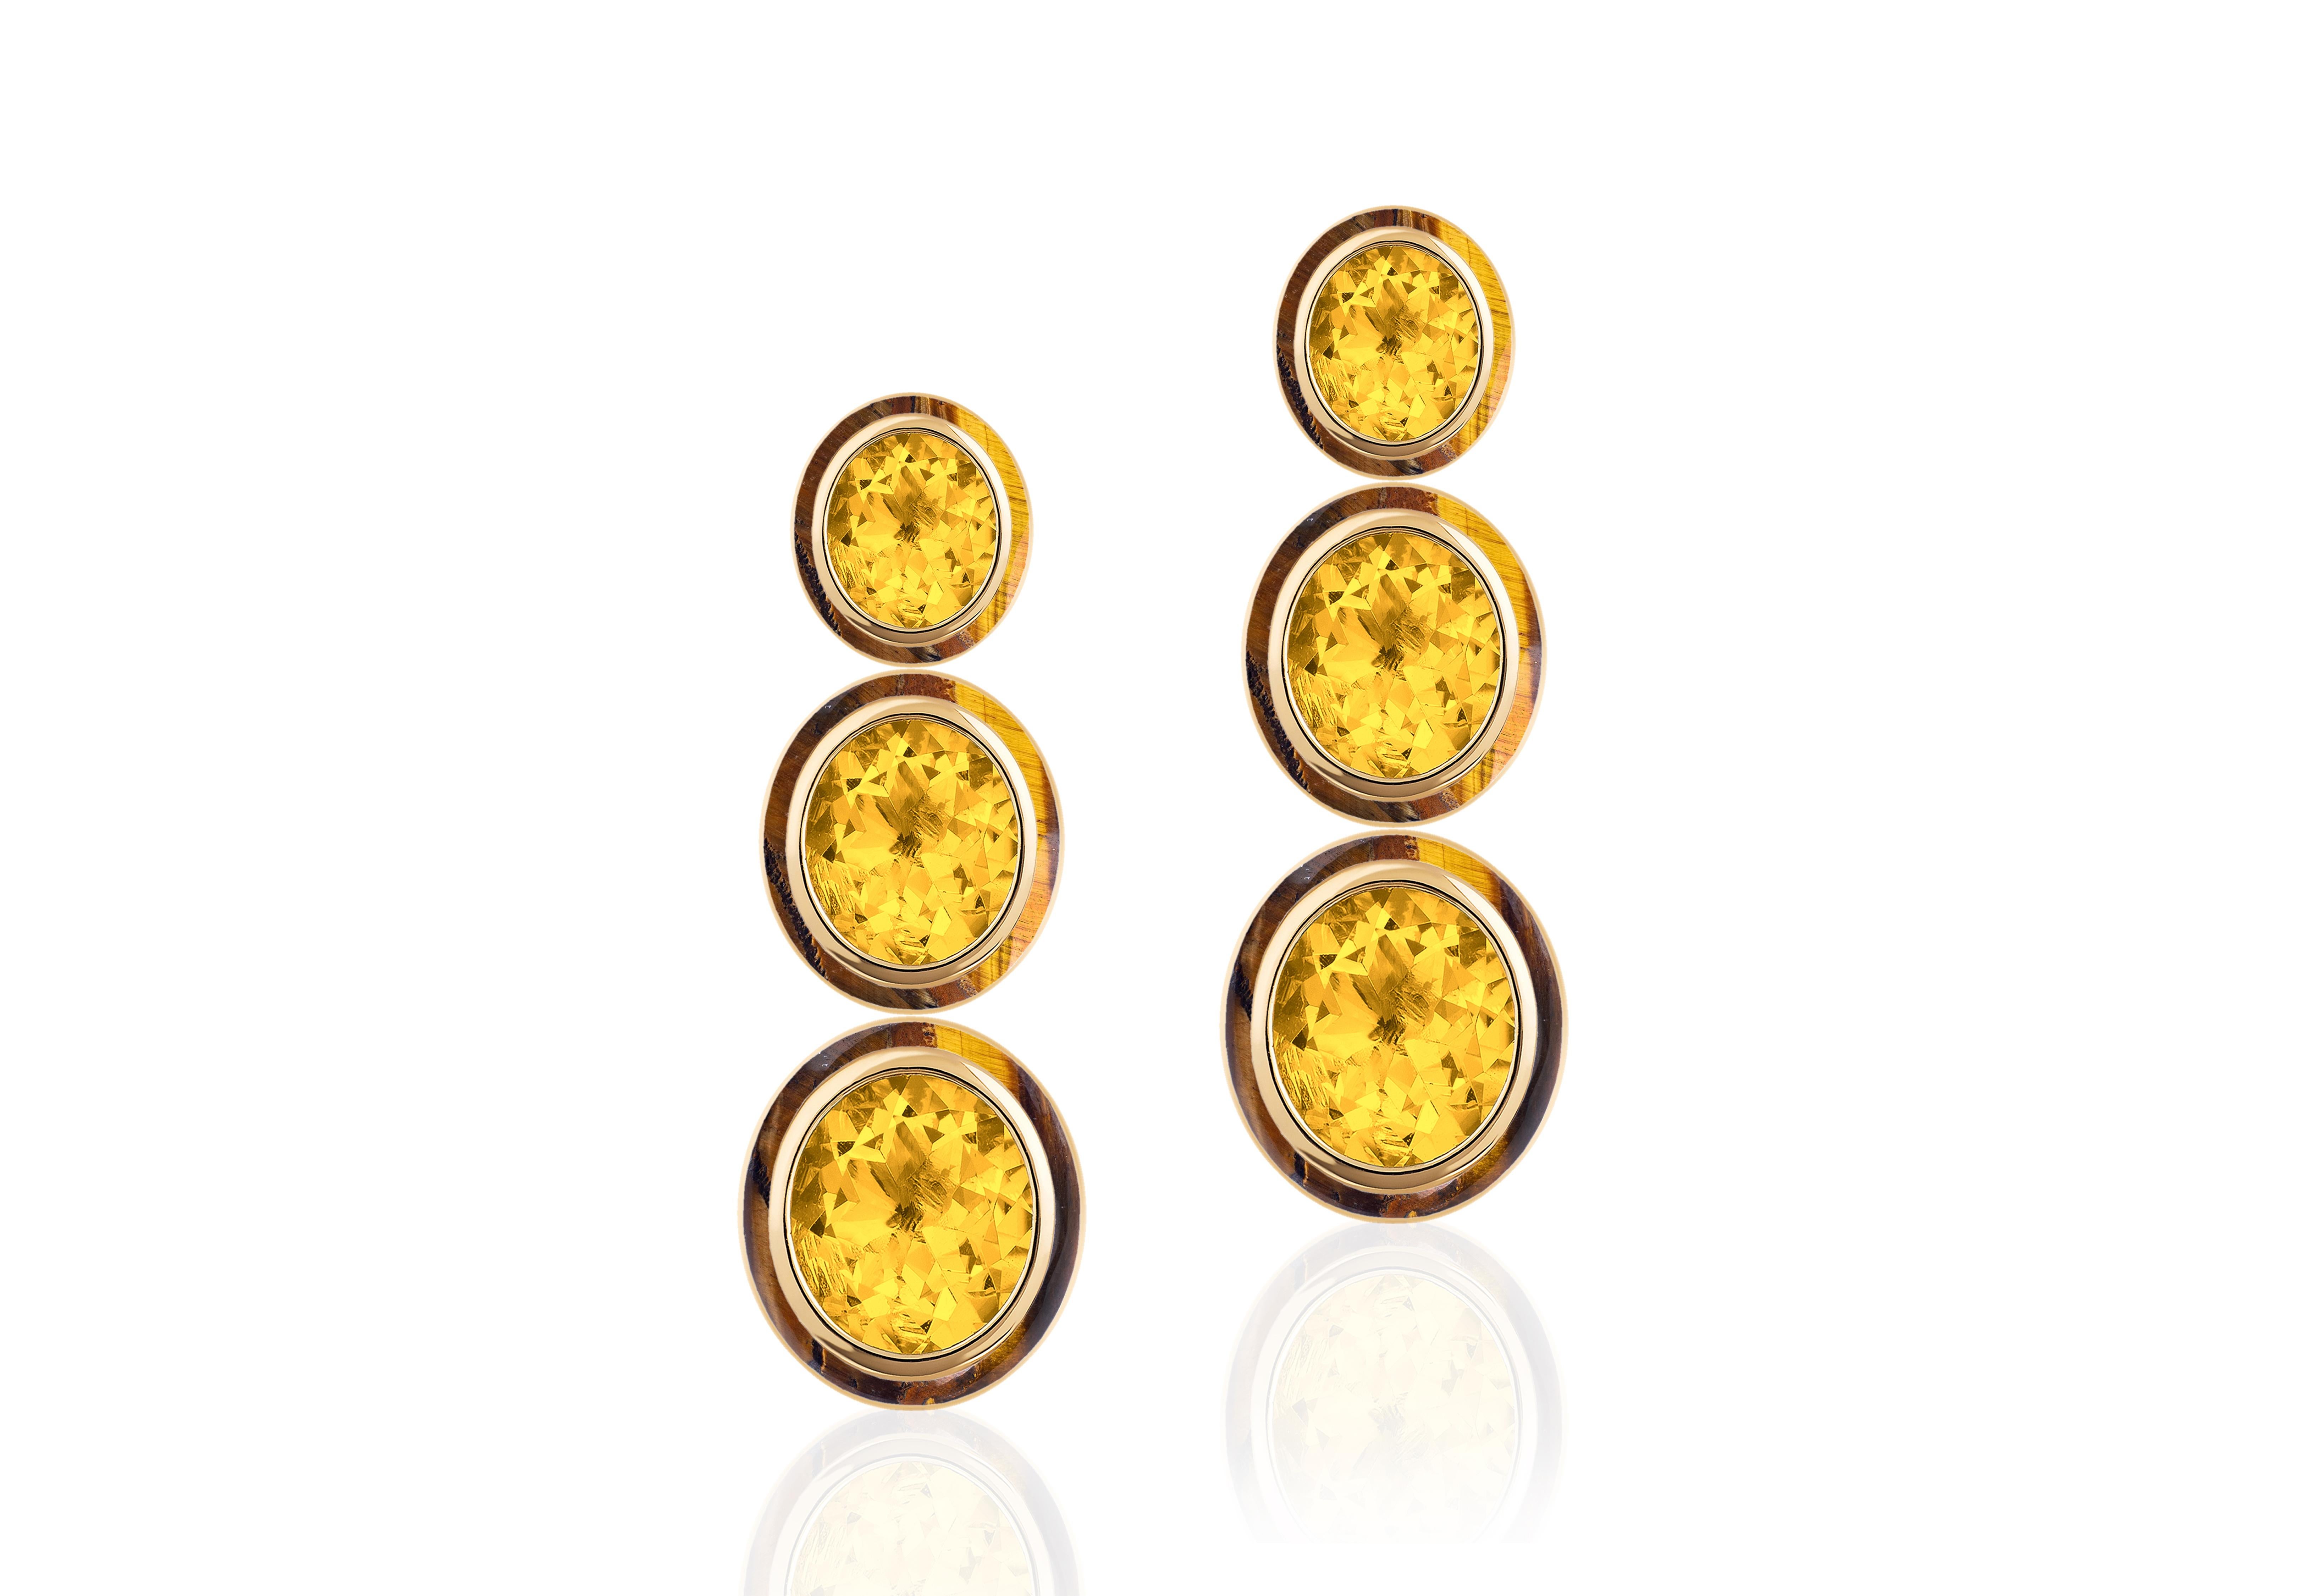 The Melange earrings are a stunning piece of jewelry featuring a three-tiered oval shape design. Made of 18K yellow gold, they feature Citrine and Tiger's Eye gemstones, creating a beautiful melange of warm, golden hues. These earrings are perfect